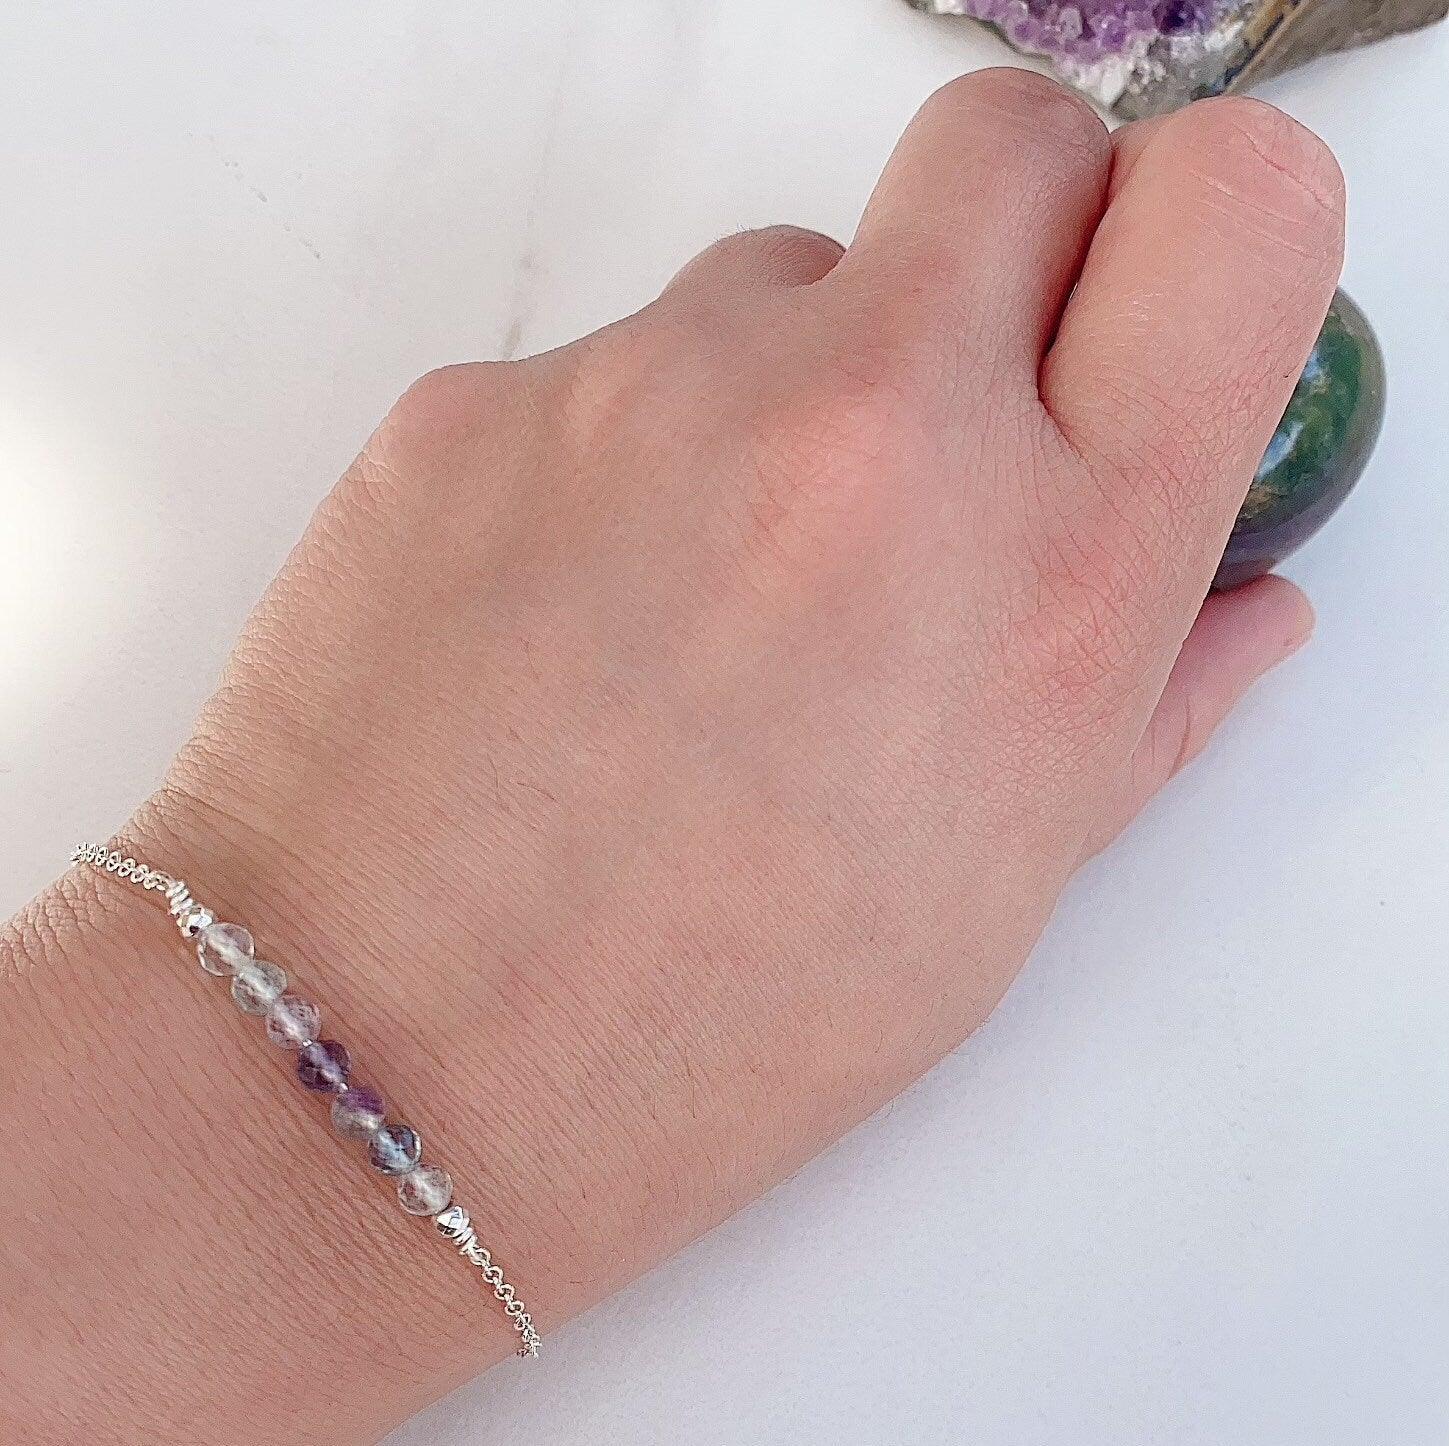 Dainty Rainbow Fluorite Healing Gemstone Sterling Silver Bracelet With Reiki Infusion, Boosts concentration and creativity and is great for students and writers